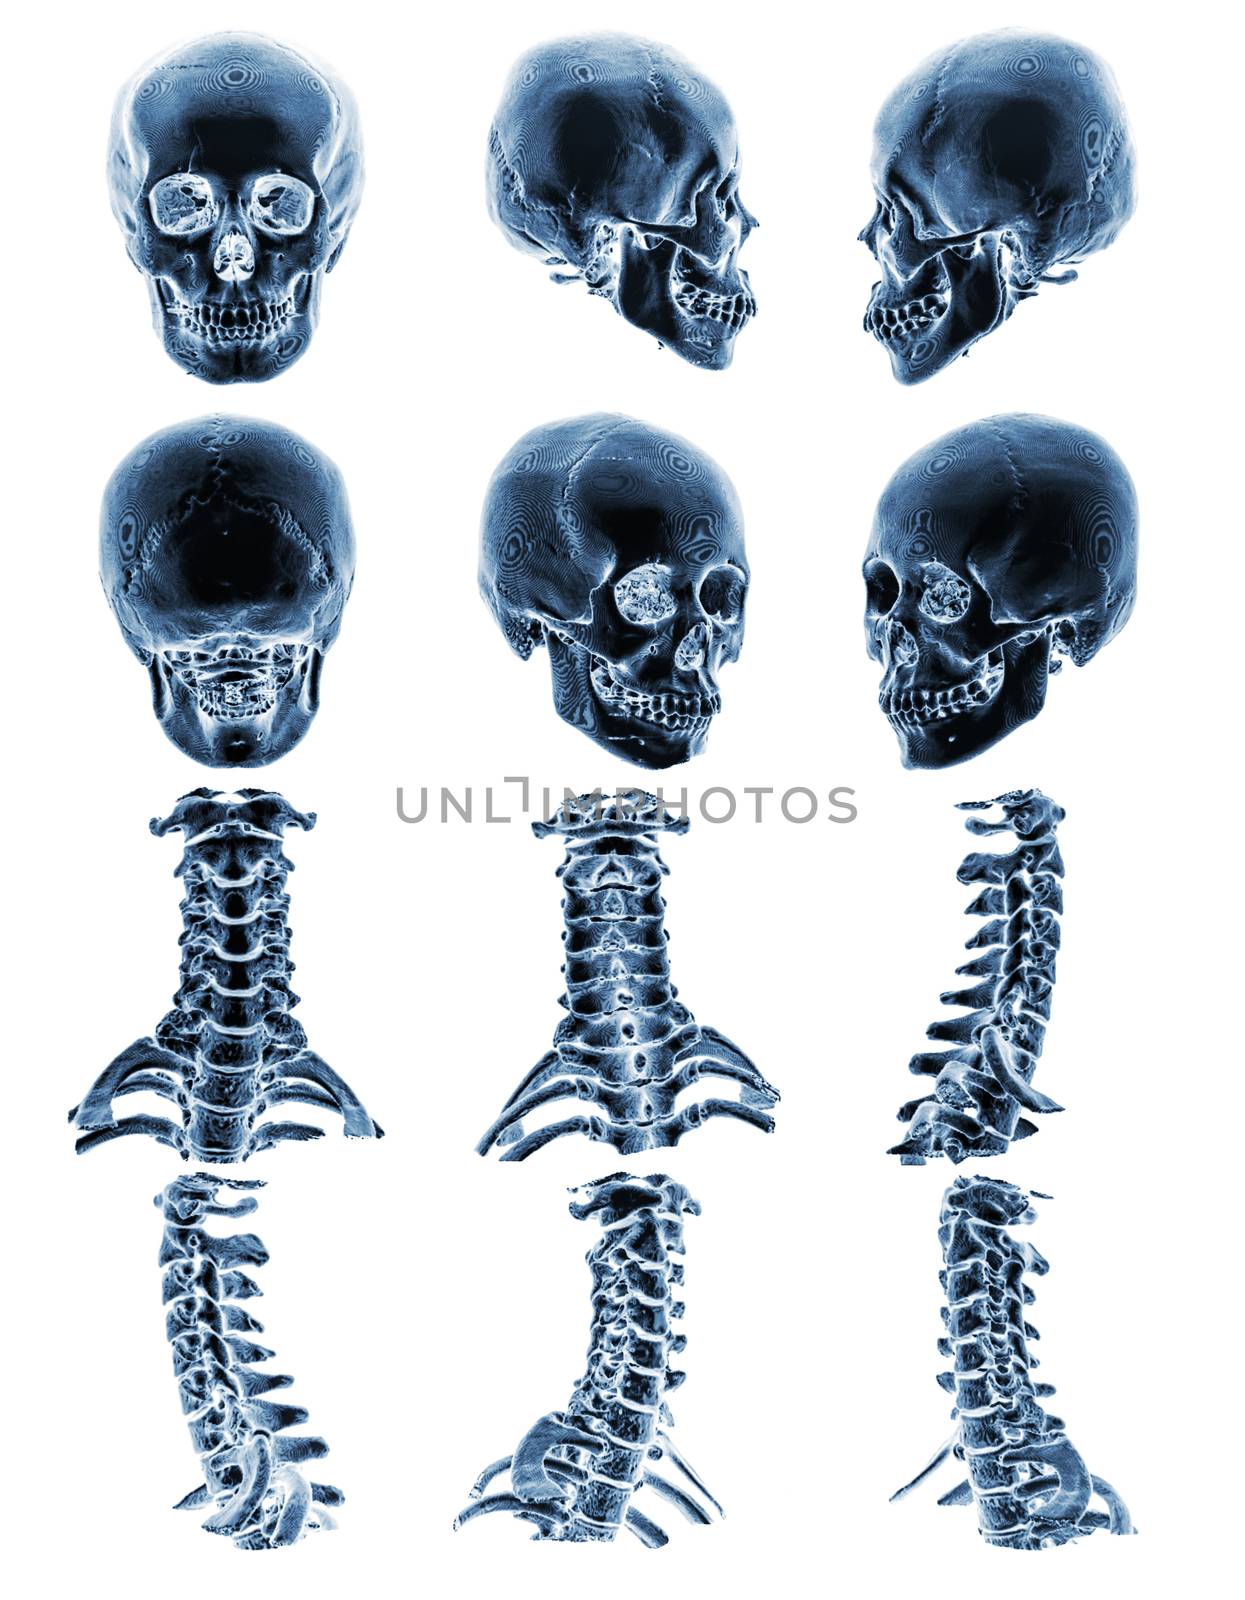 CT scan ( Computed tomography ) with 3D graphic show normal human skull and cervical spine . Multiple view .